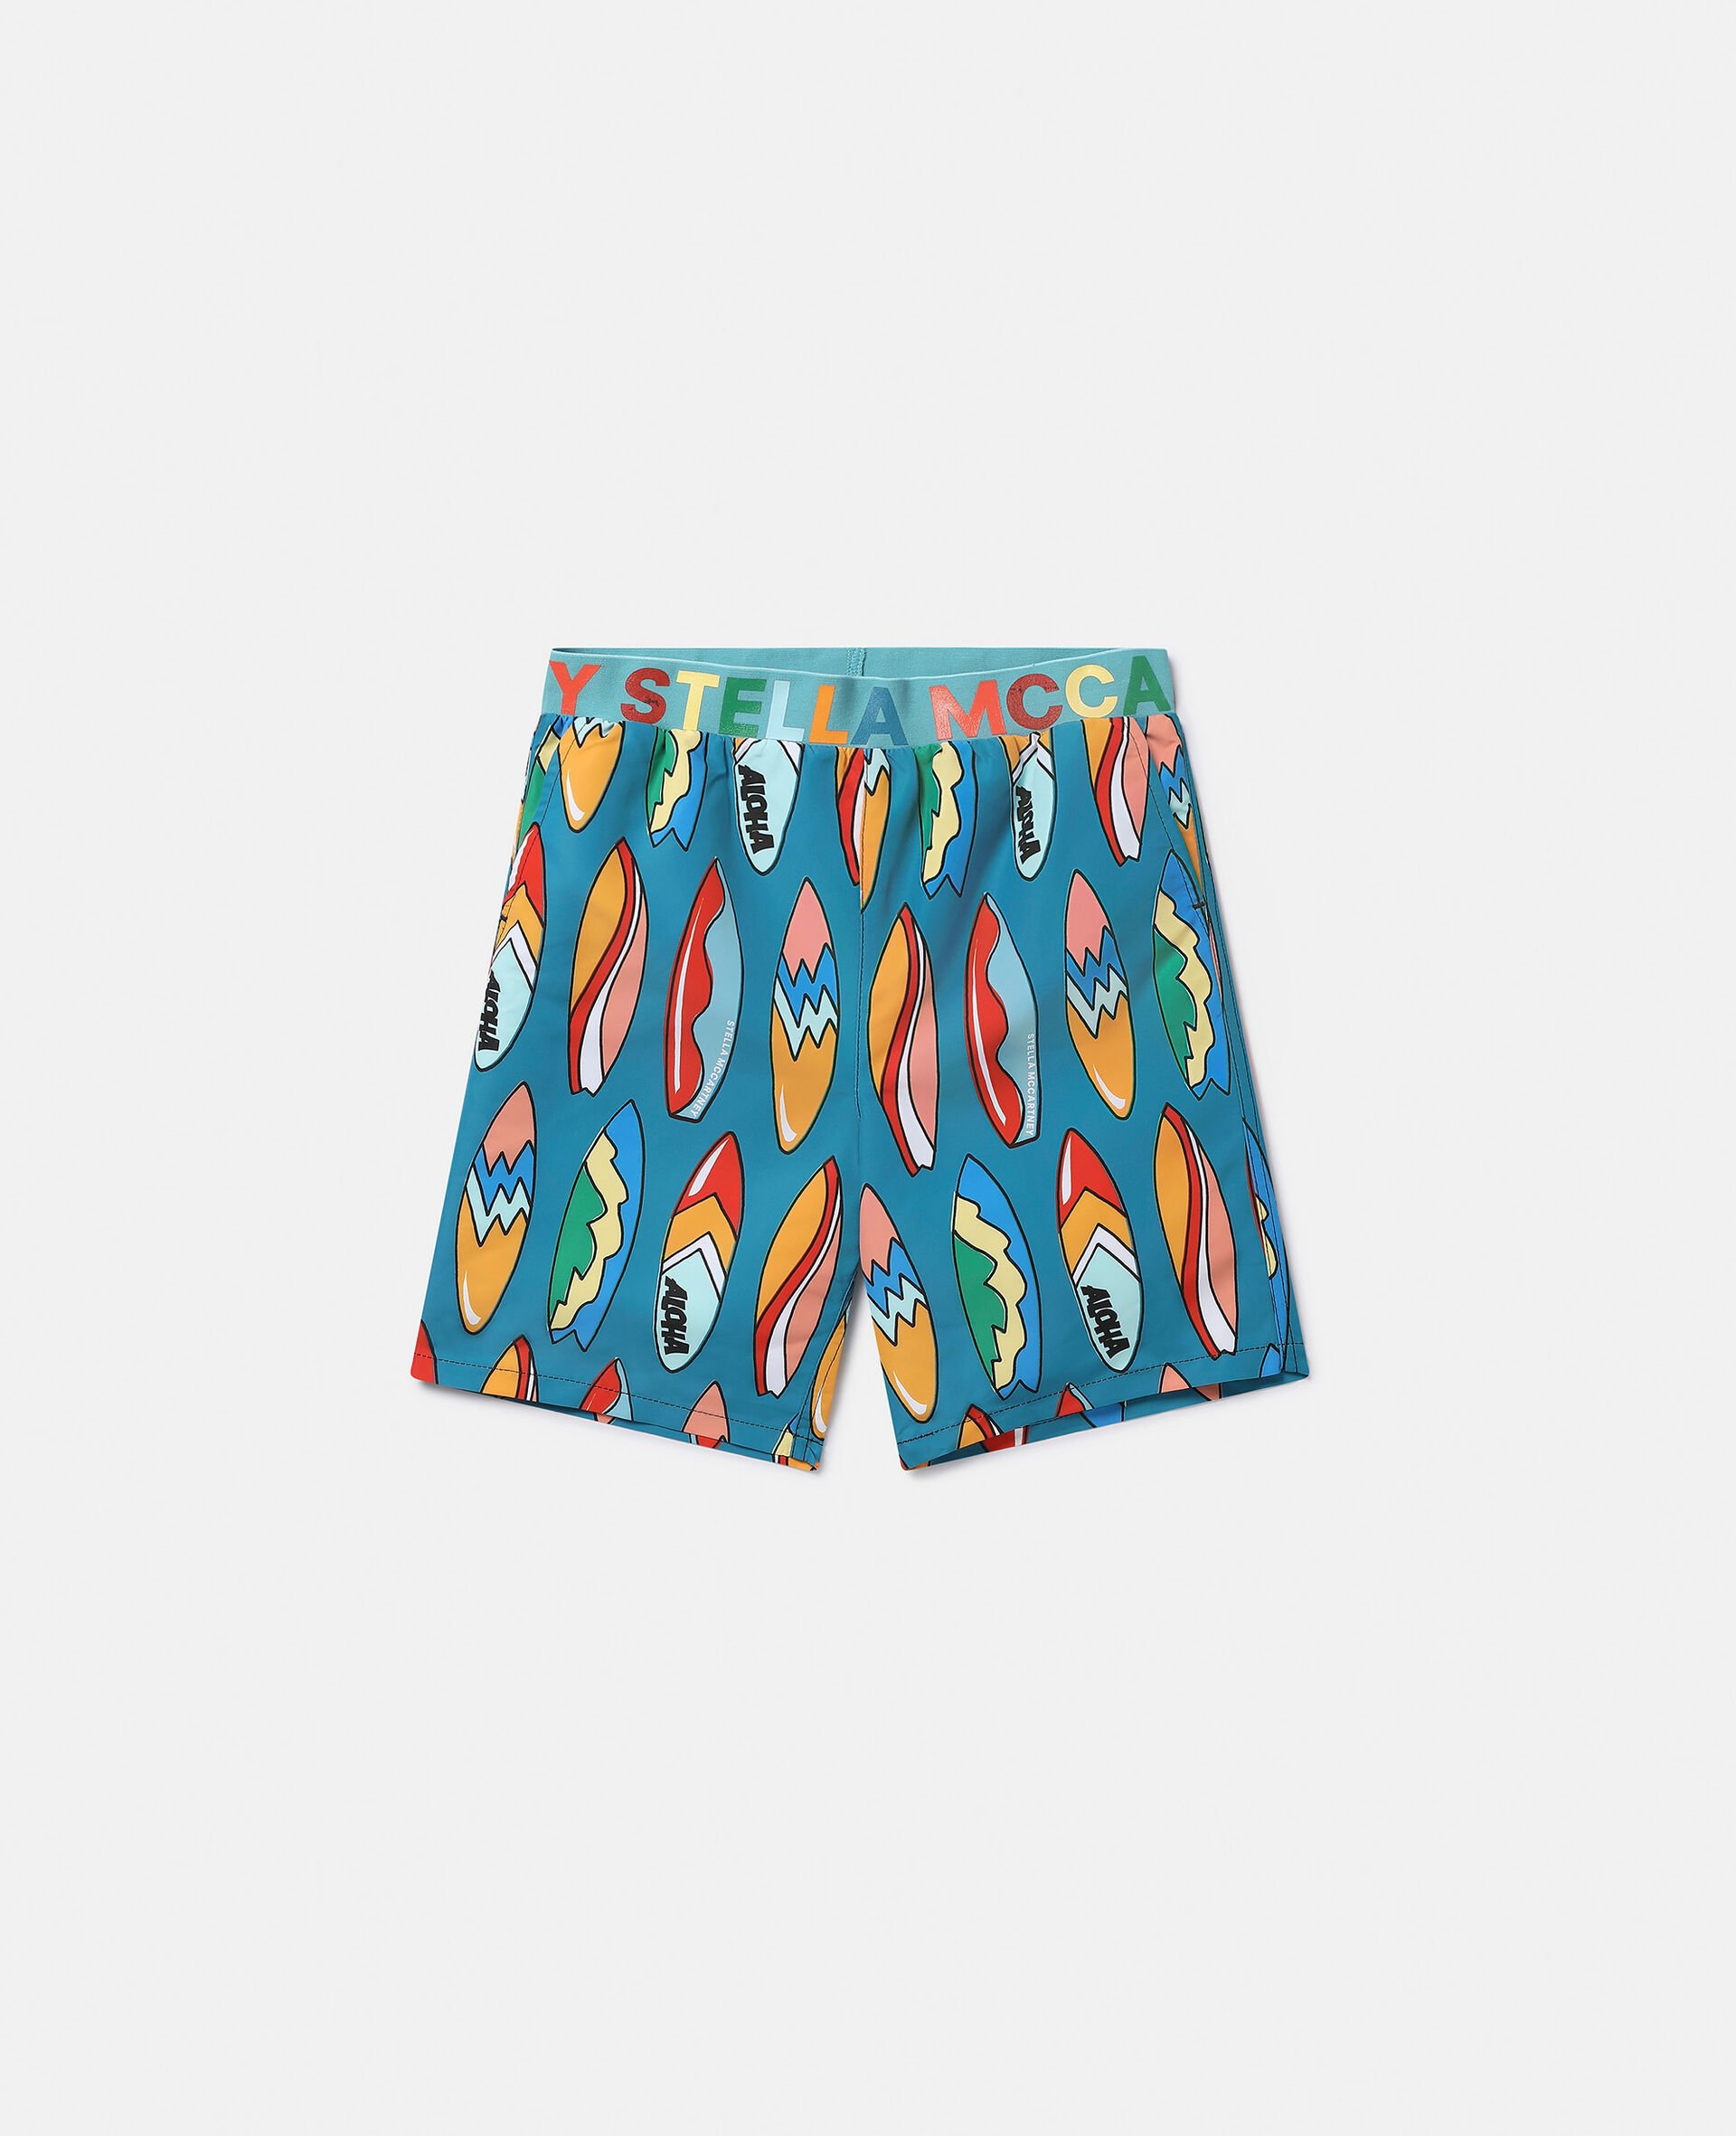 Surfboard Print Swimming Trunks-Multicolored-large image number 0